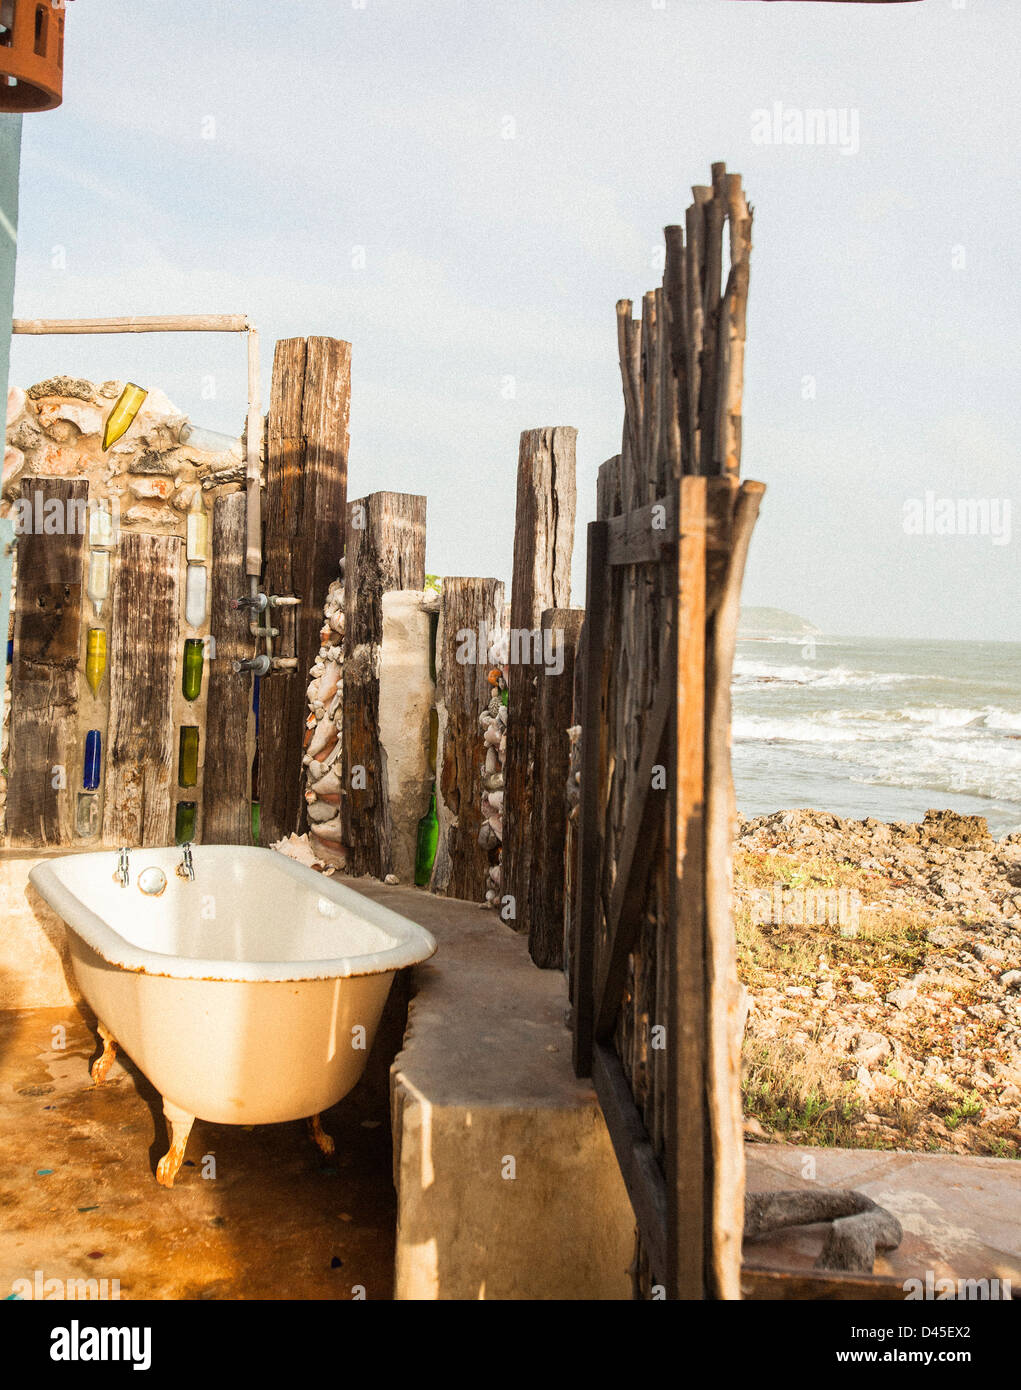 A bath tub and a wooden fence near the ocean shore. Stock Photo